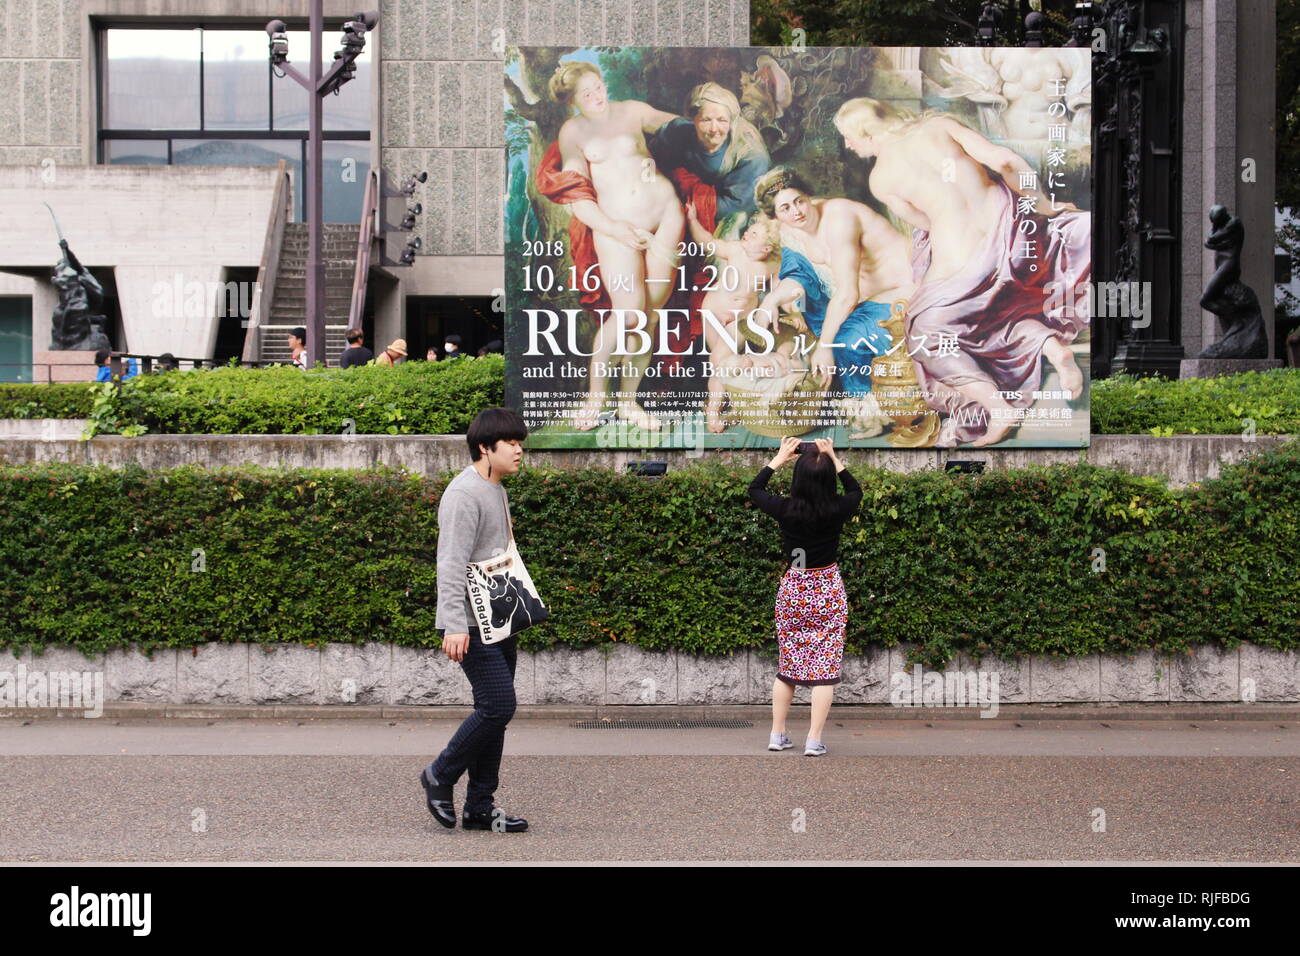 A visitor takes a photo of a large billboard advertising a Rubens exhibition in front of the National Museum of Western Art. Stock Photo